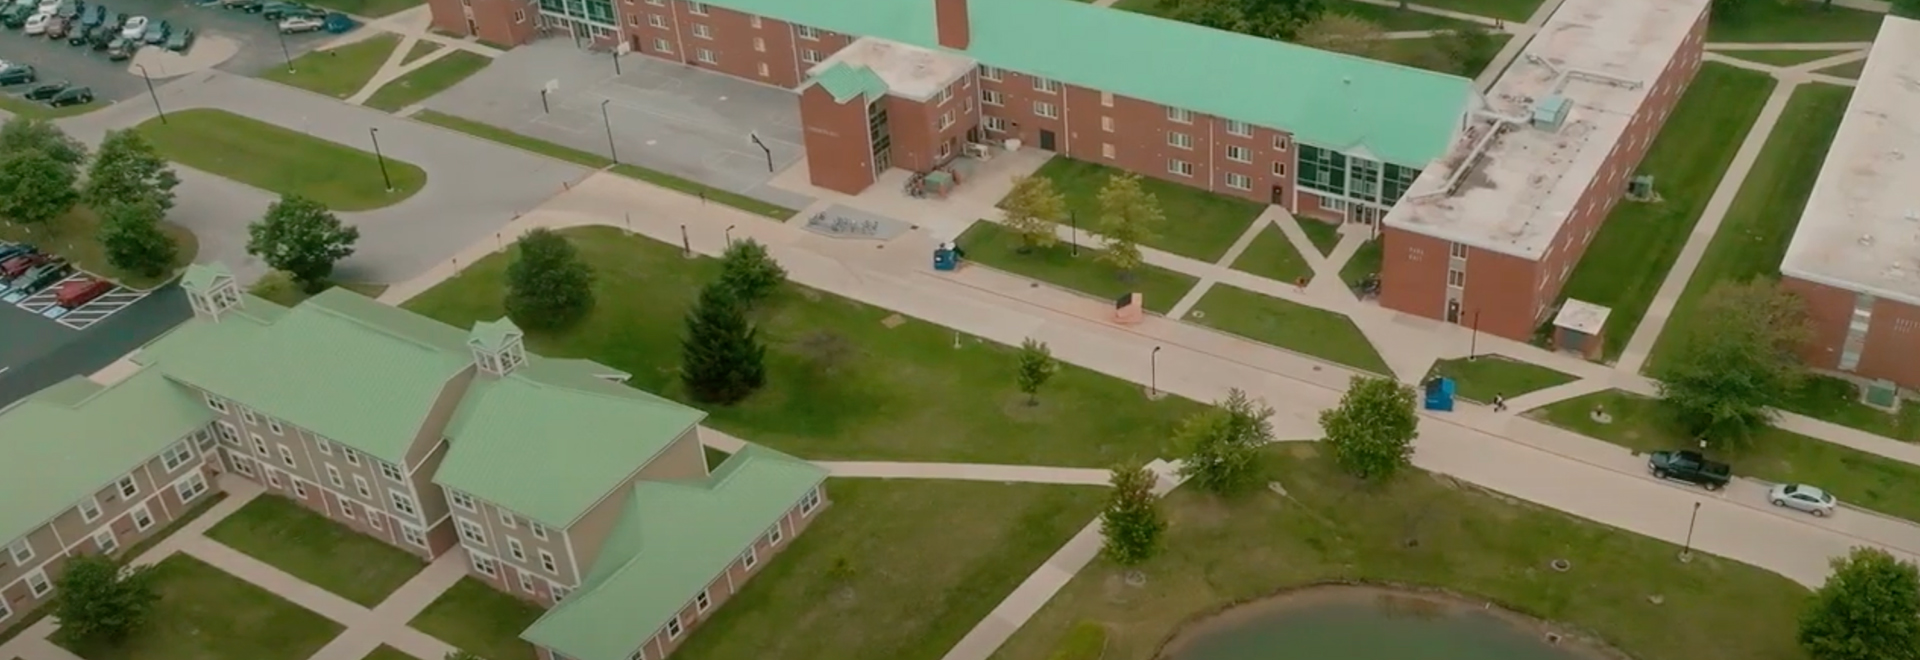 An arieal view of ONU's housing section of campus